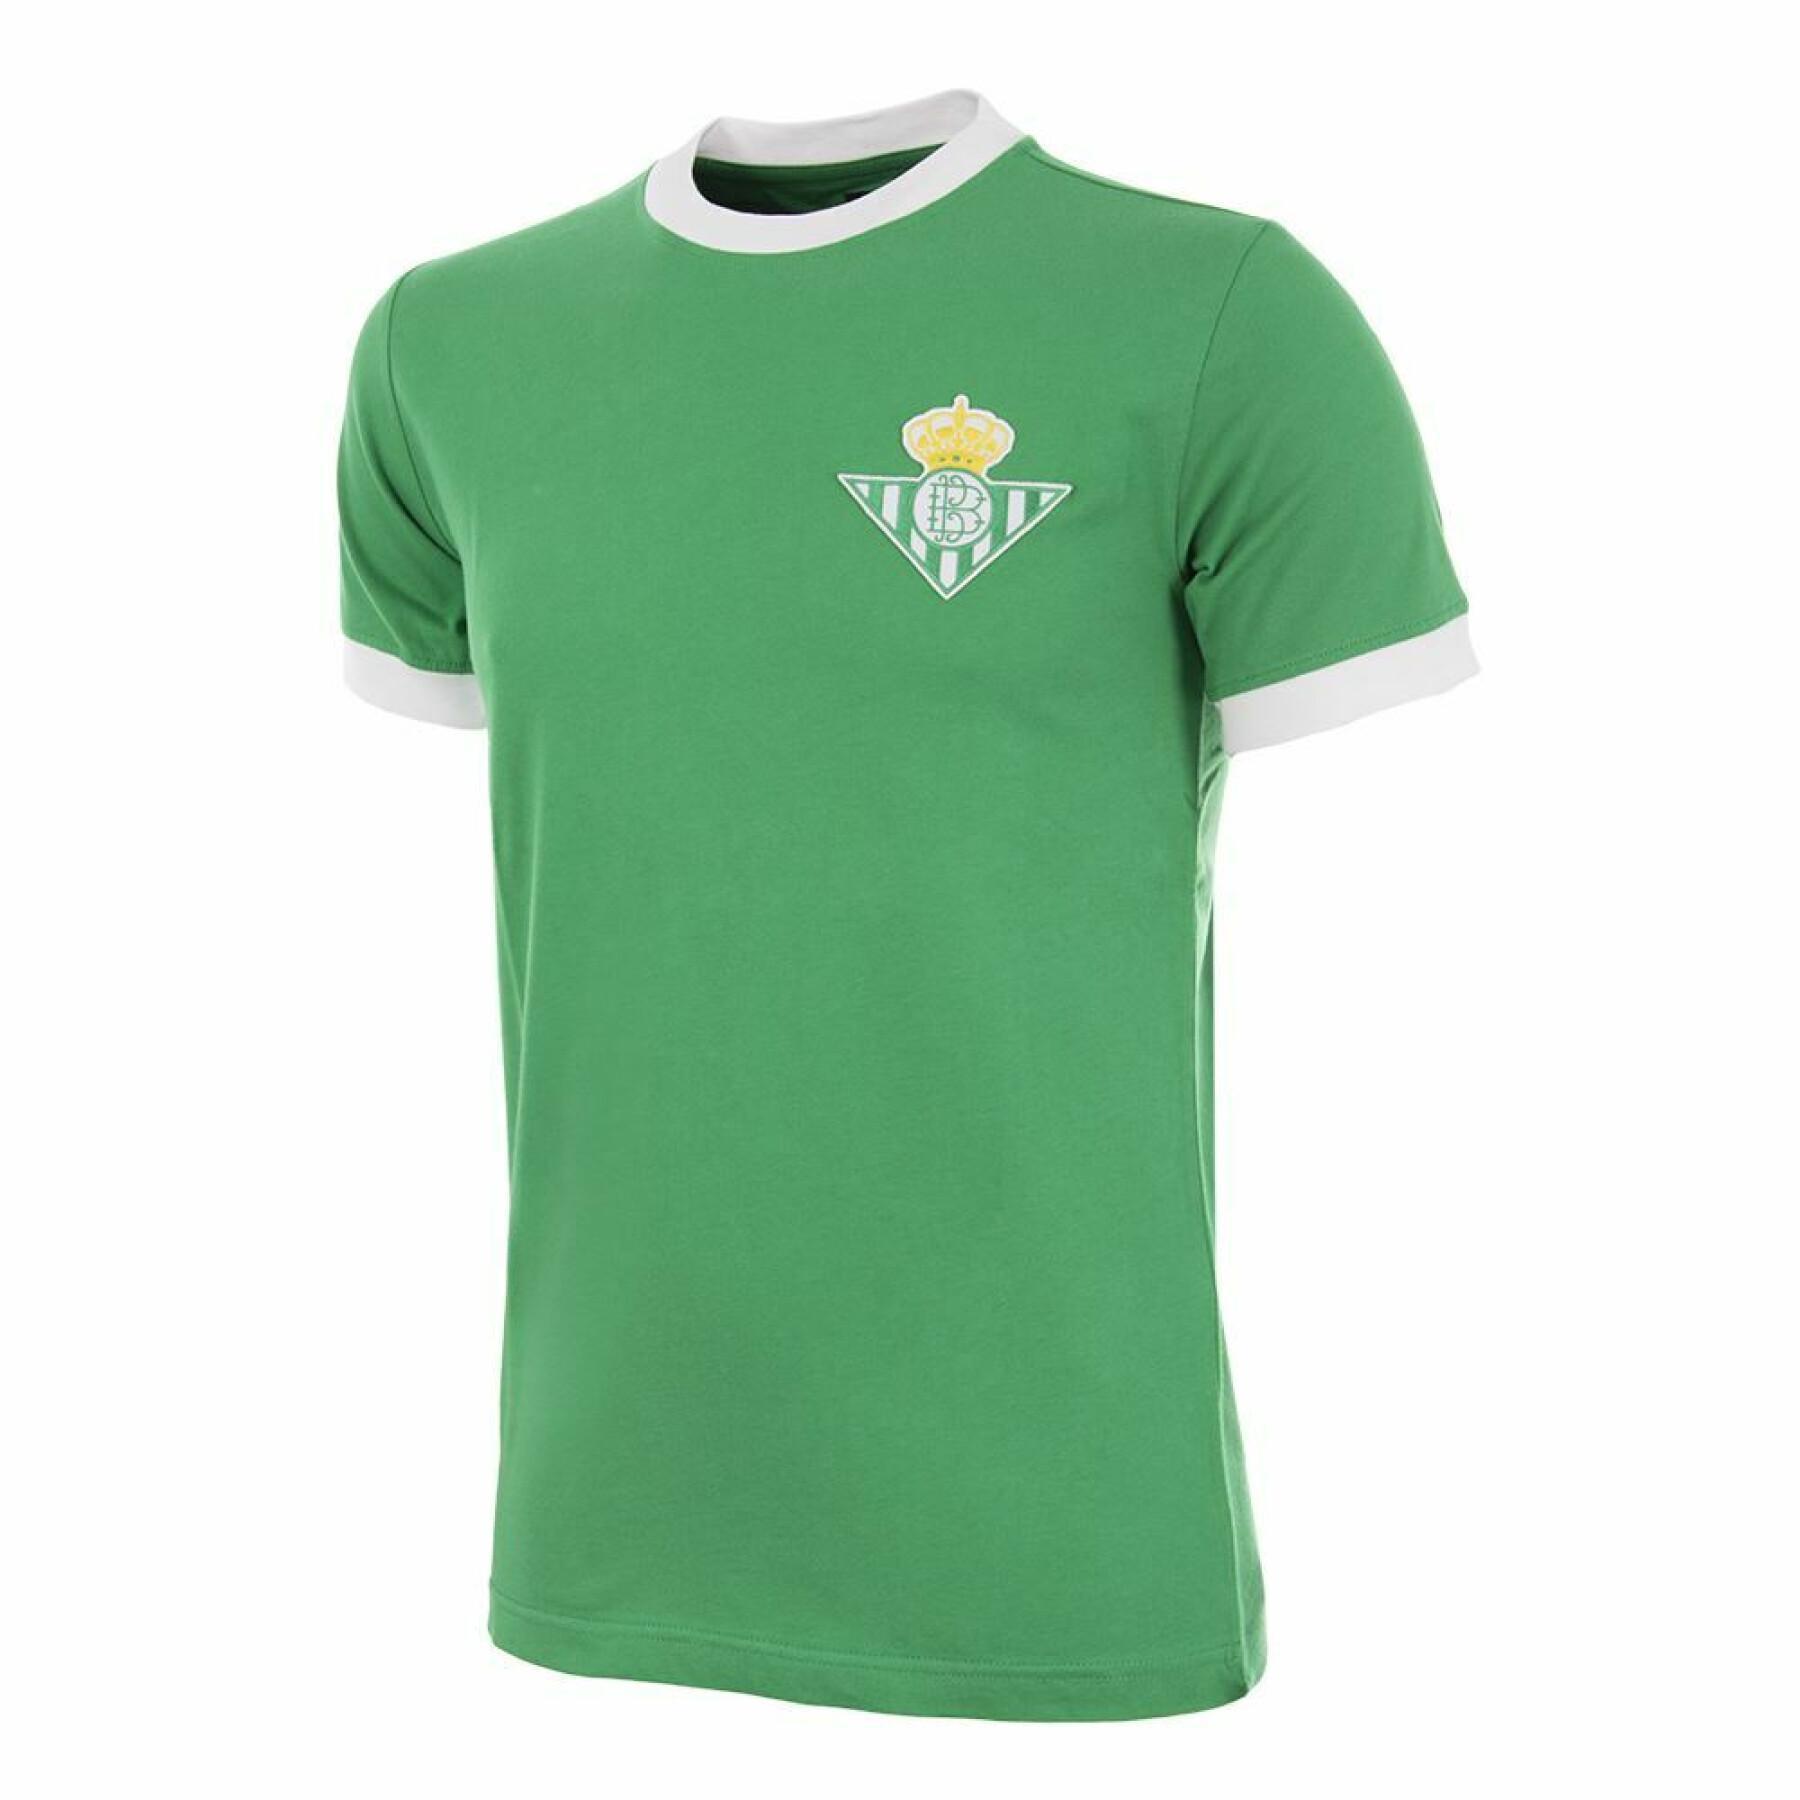 Away jersey Real Betis Seville 1970's